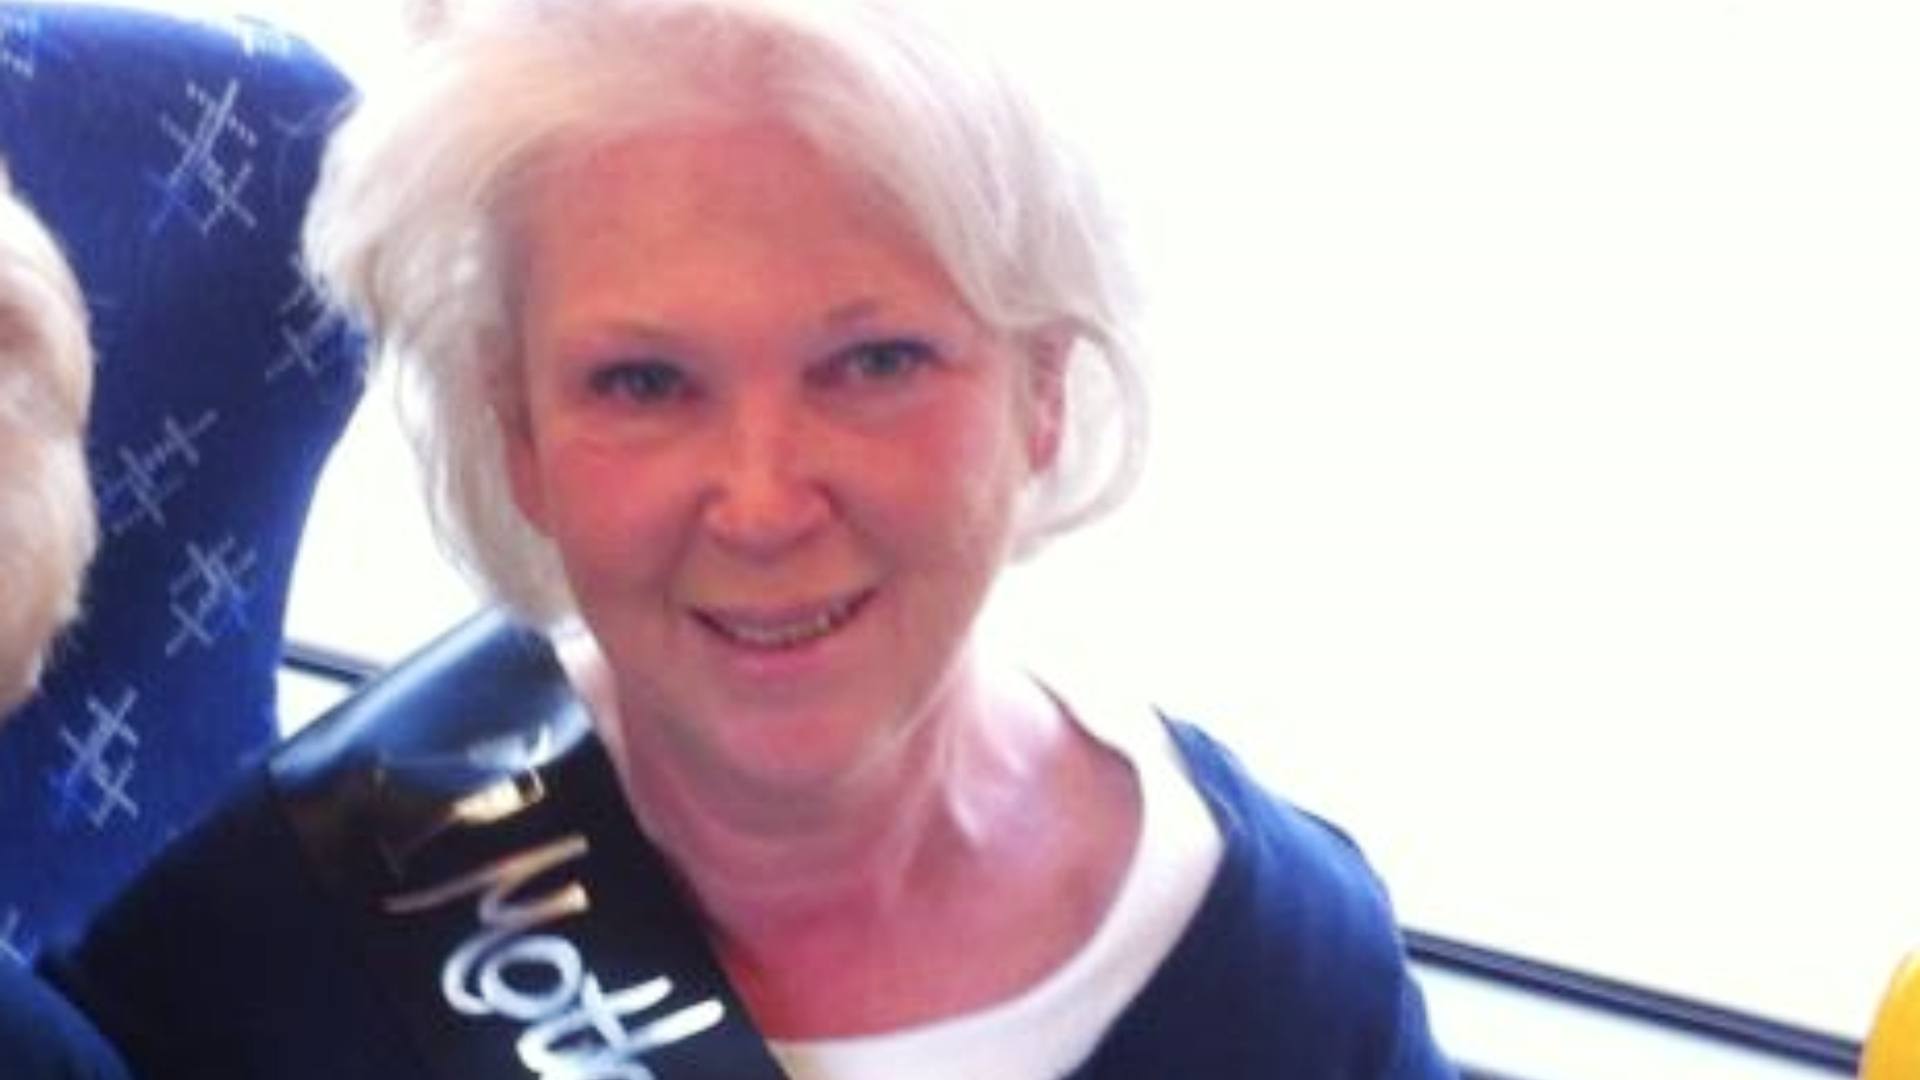 Hazel Nairn, 71, was last seen in the water near Monymusk at around 3.05pm on Friday, November 18.